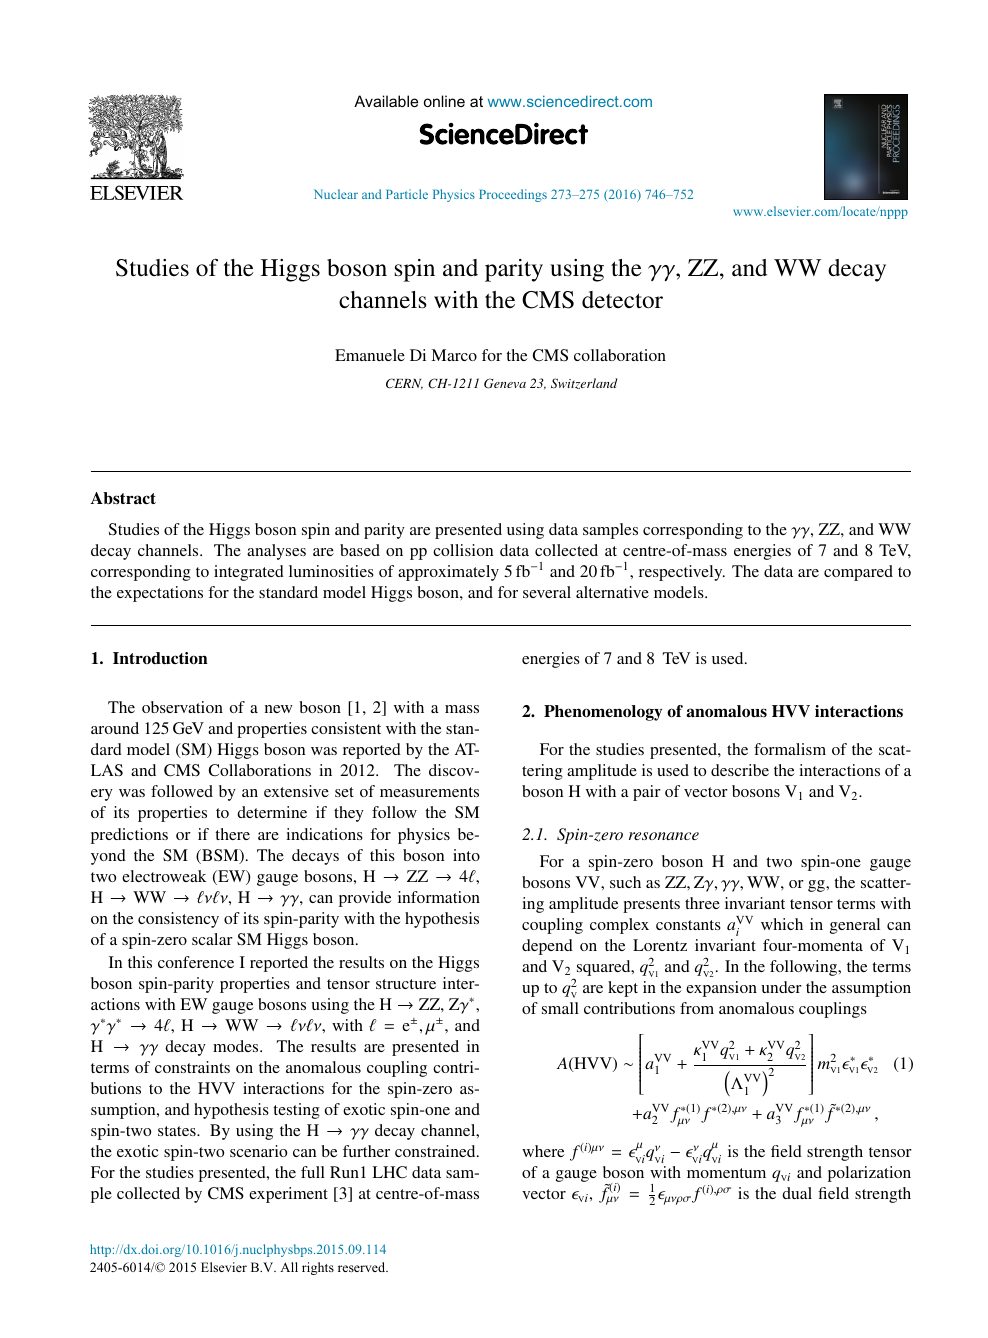 Studies Of The Higgs Boson Spin And Parity Using The Gg Zz And Ww Decay Channels With The Cms Detector Topic Of Research Paper In Physical Sciences Download Scholarly Article Pdf